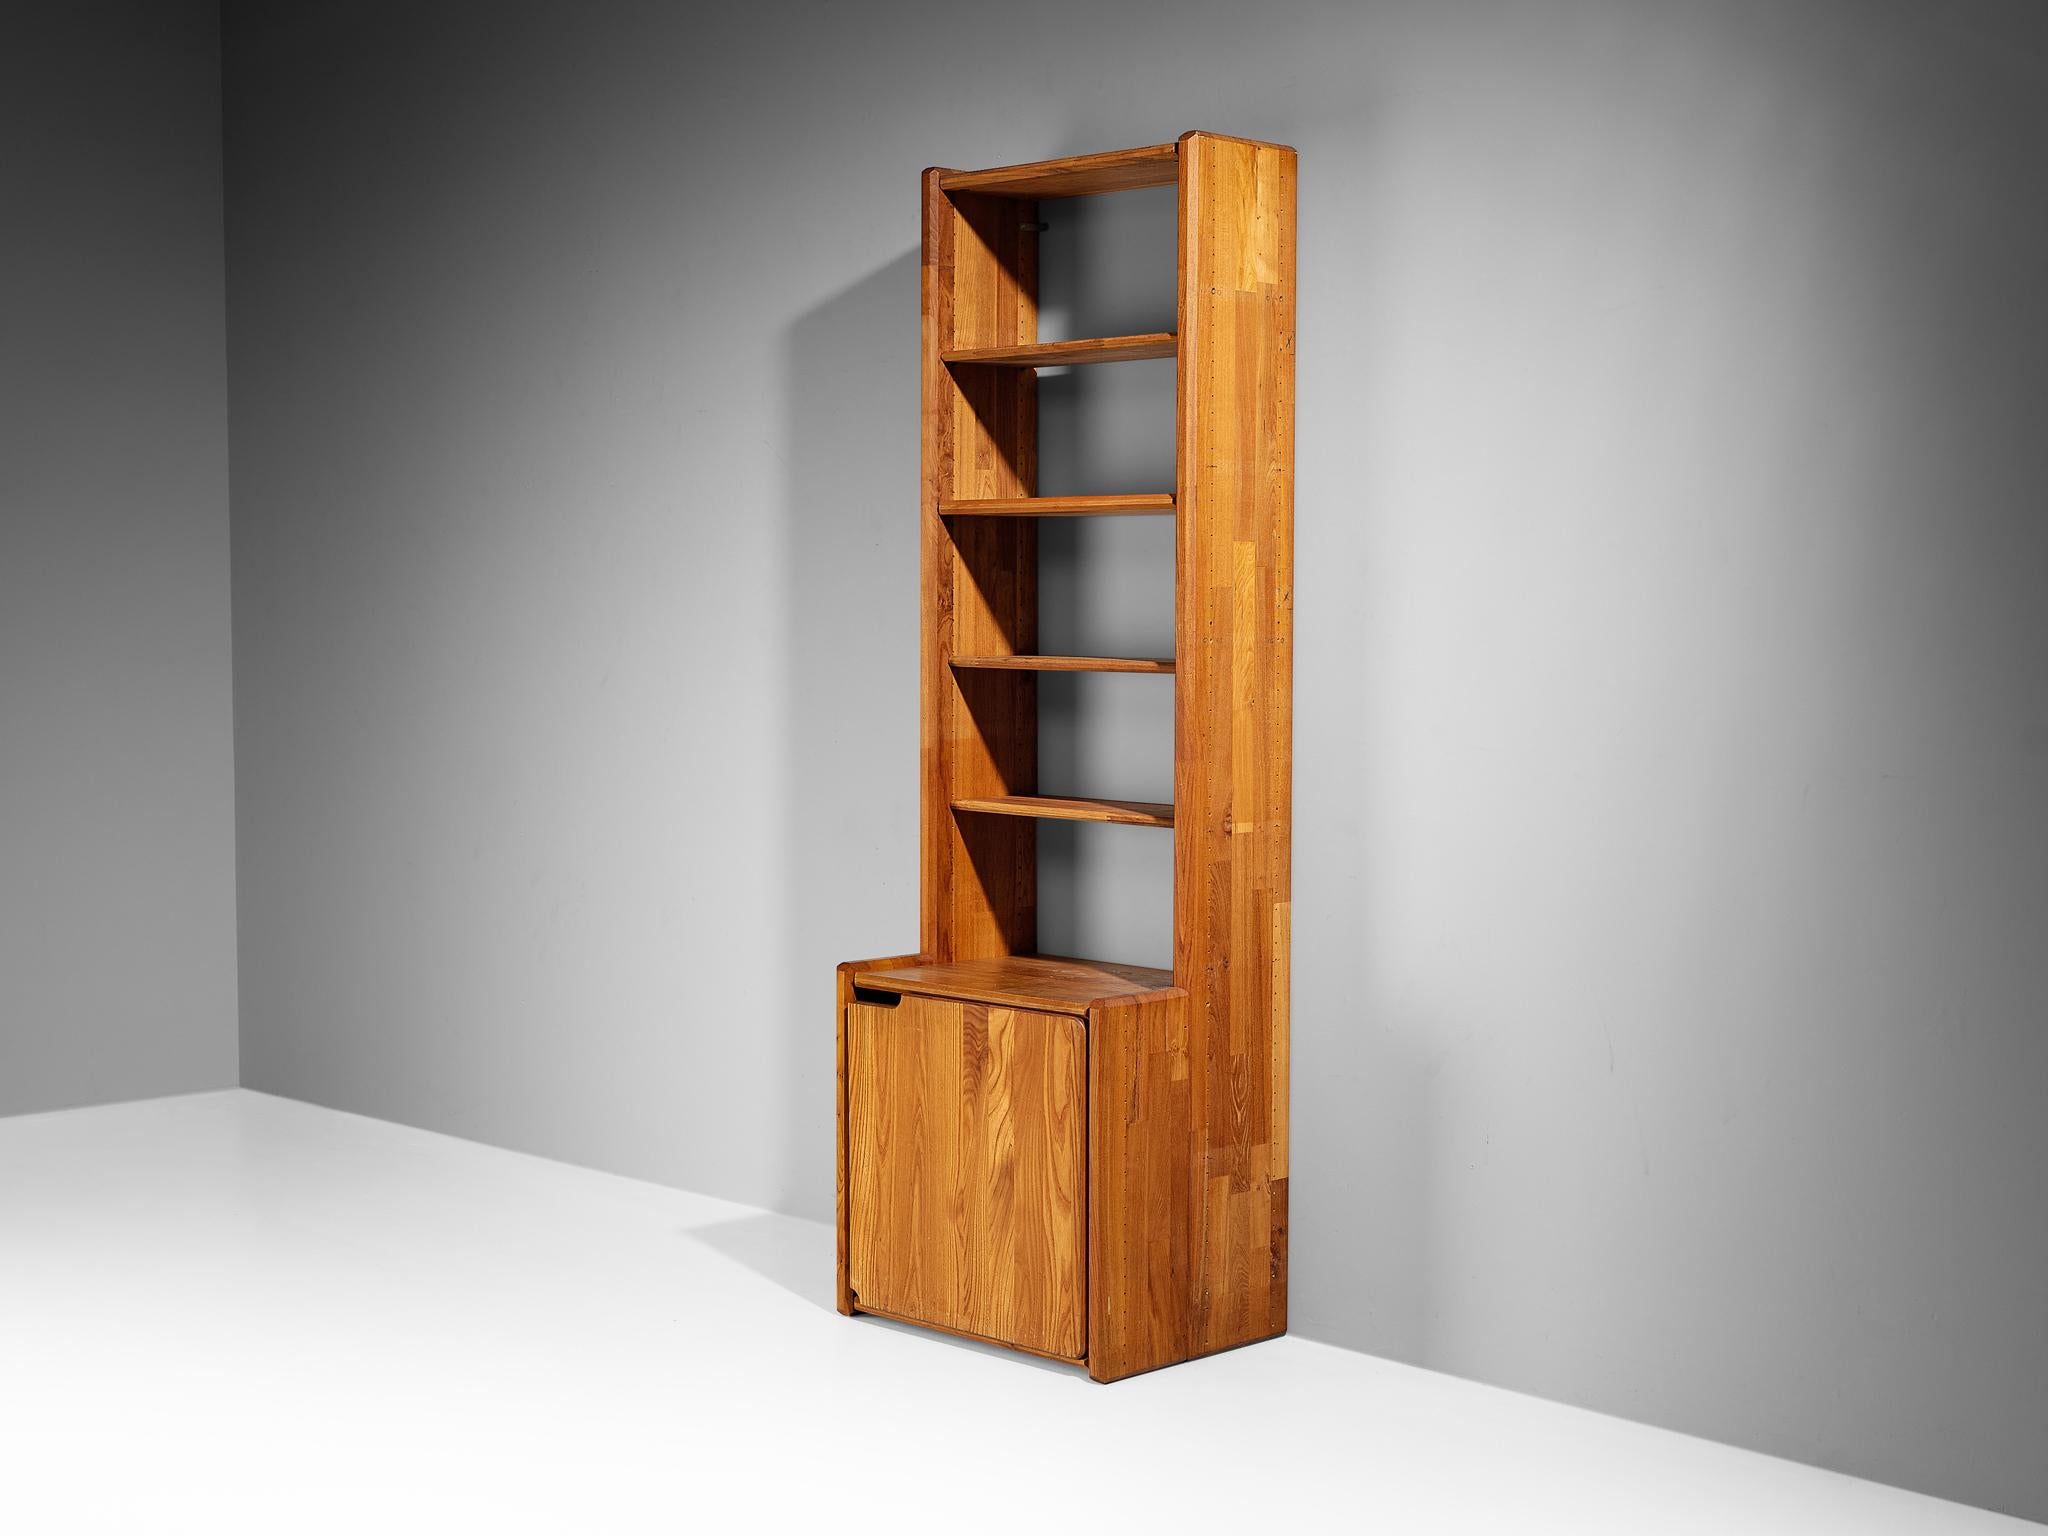 Pierre Chapo, bookcase, model 'GO', solid elm, France, 1983

This cabinet is realized according to Chapo's fundamental principles: material, form, and function. A sophisticated composition is created by the arrangement of different open and closed